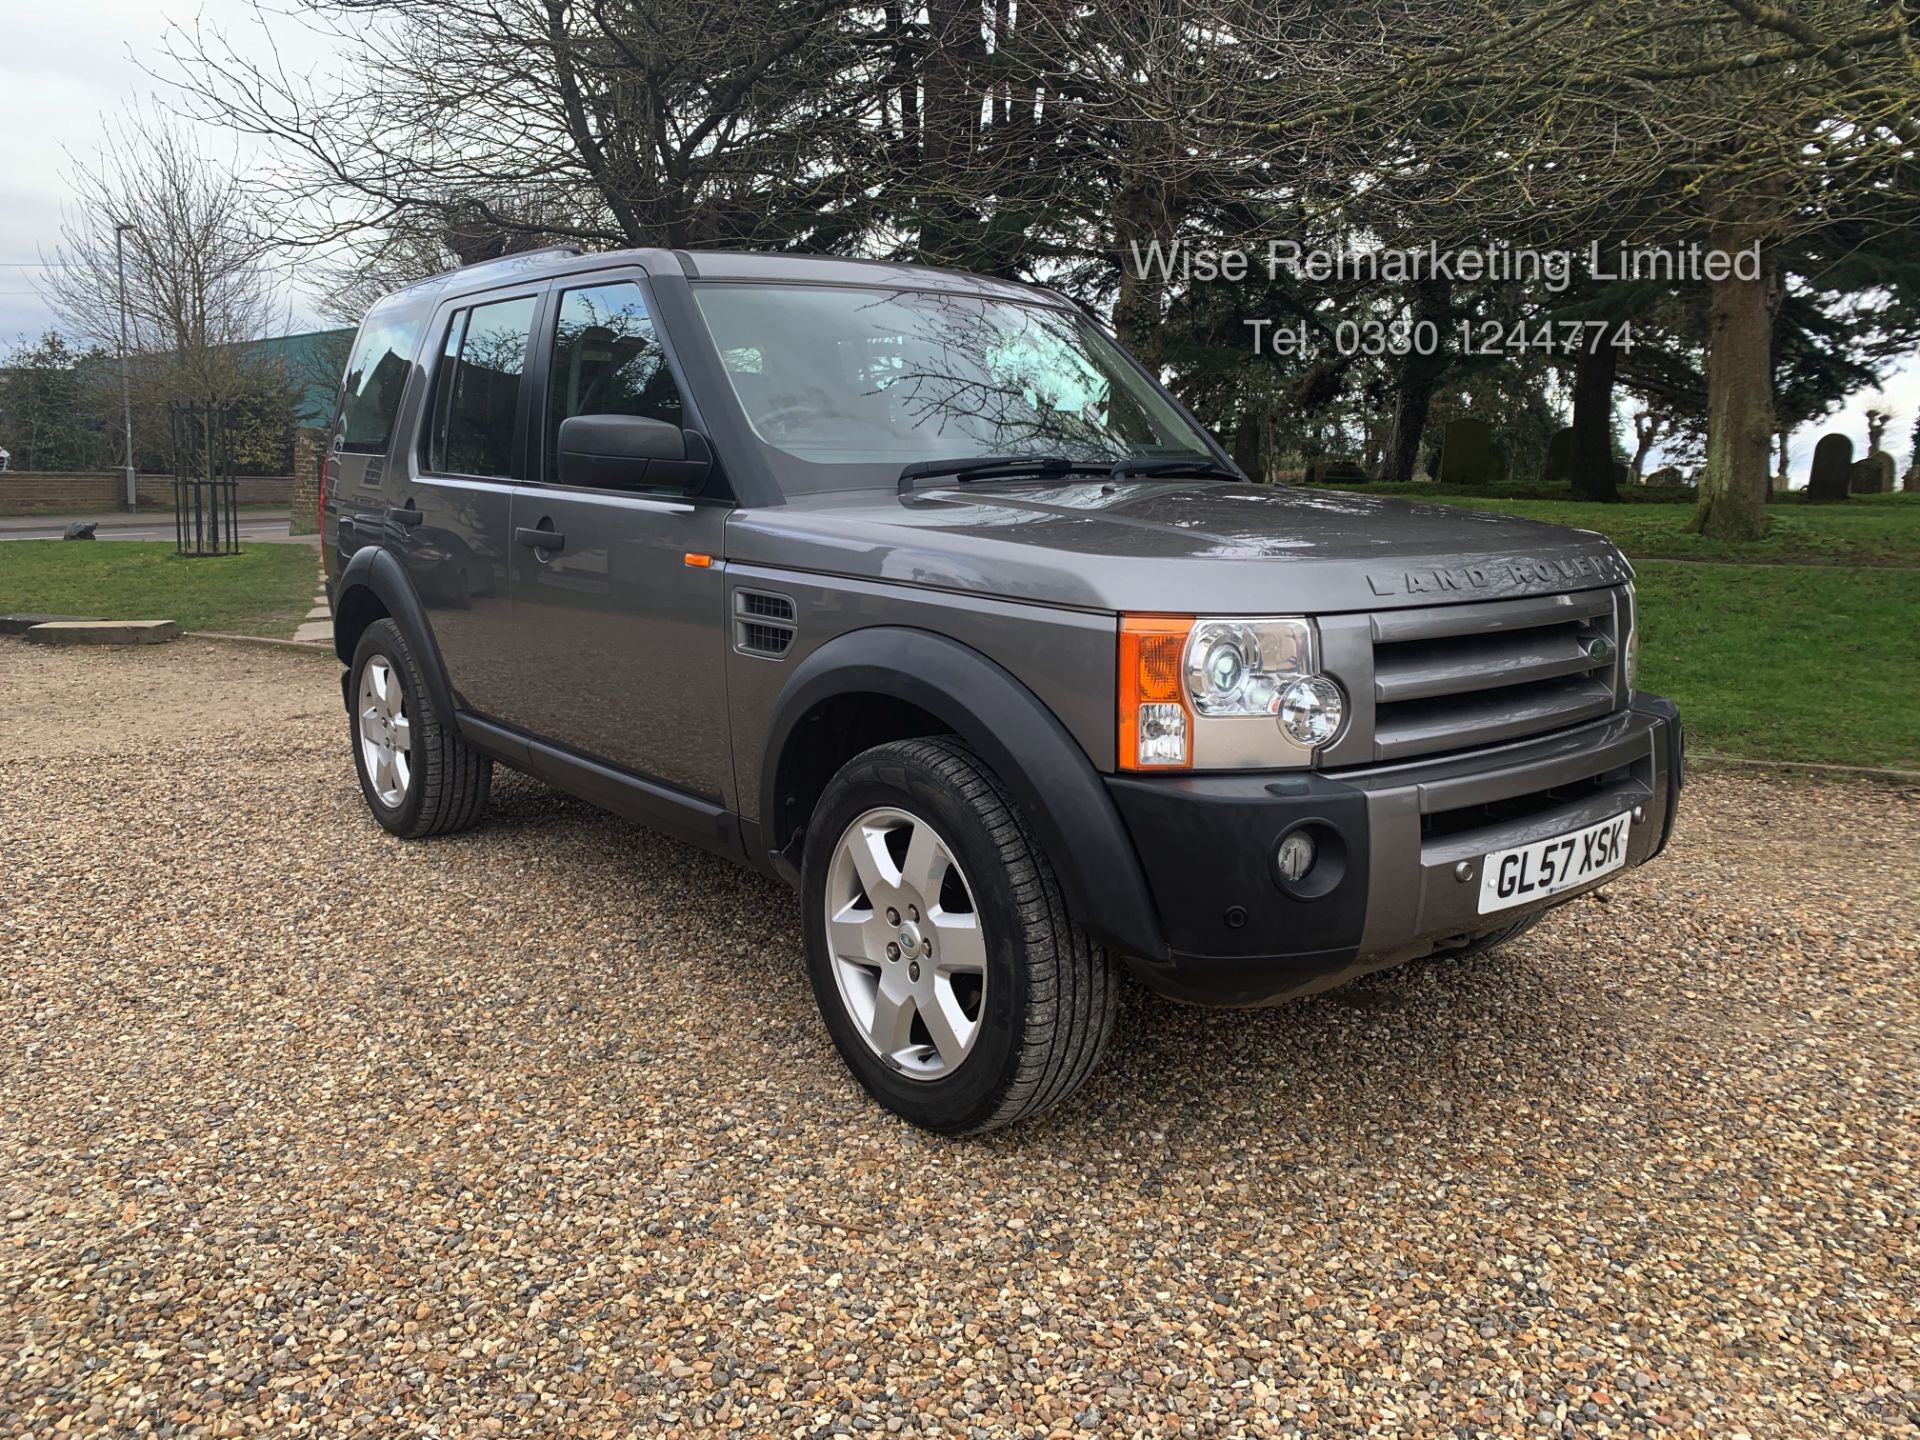 Land Rover Discovery 2.7 TDV6 HSE - Automatic - 2008 Reg - Full Leather - 7 Seater - Sat Nav -